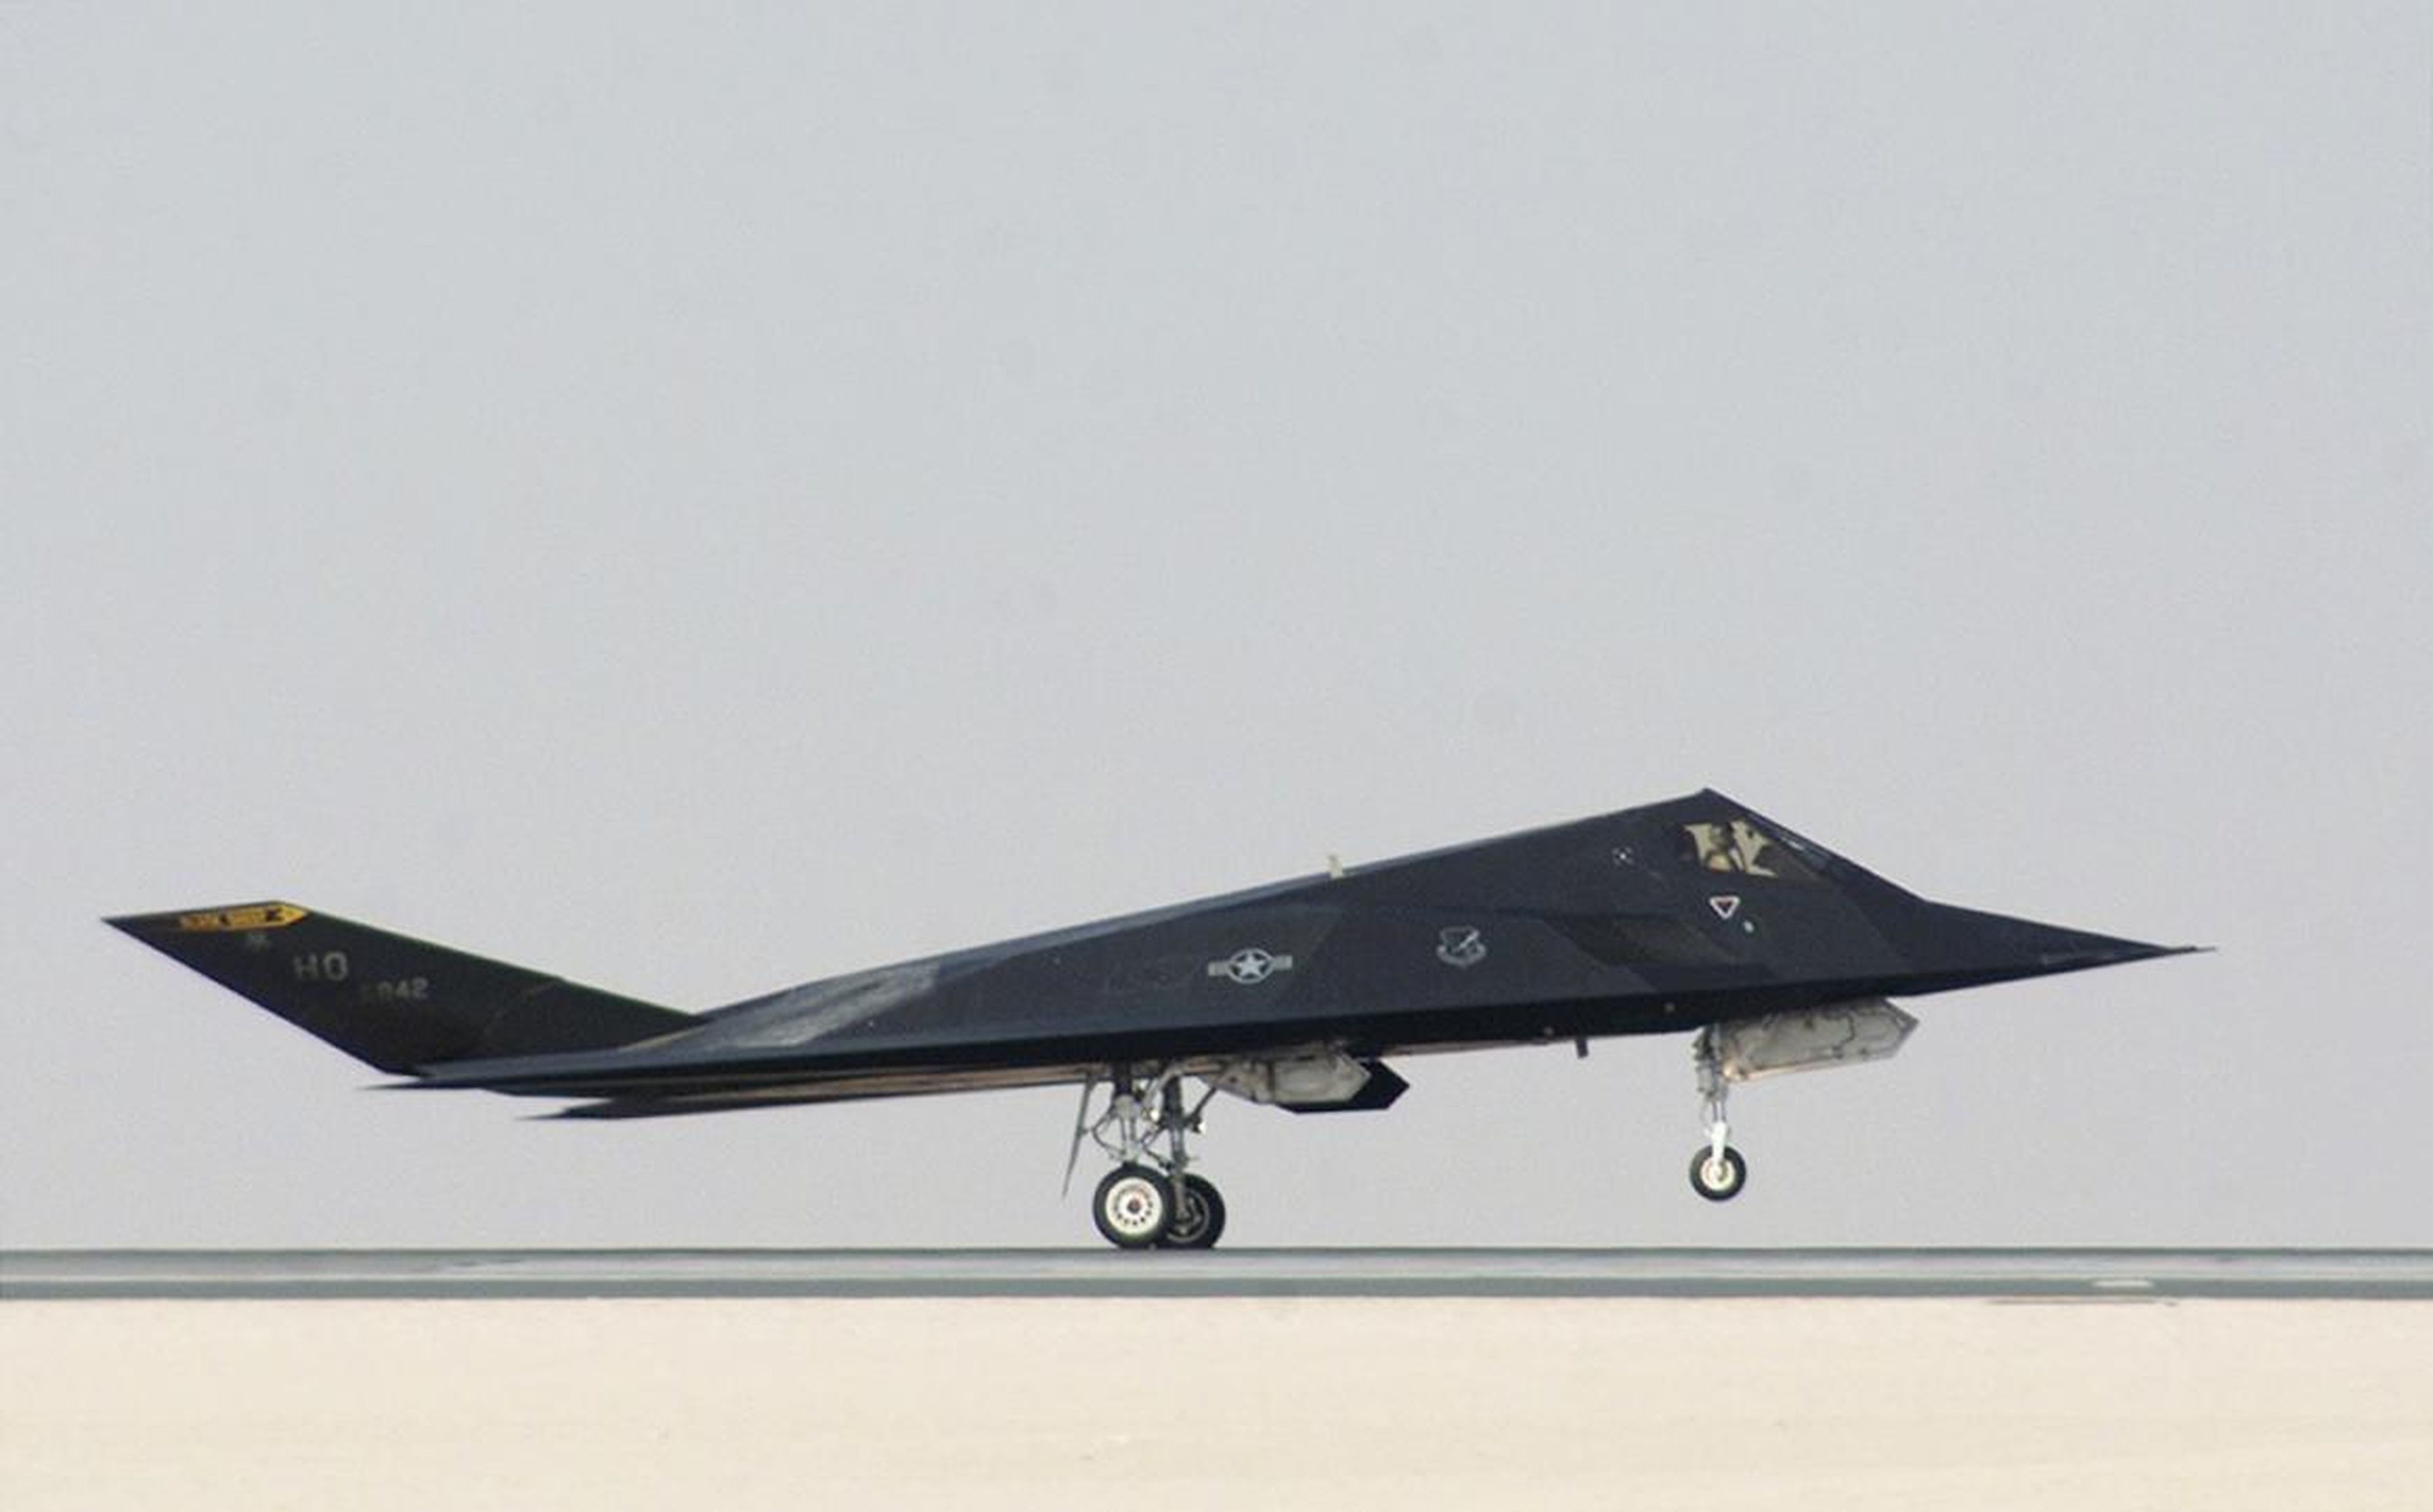 Lockheed's F-117 Nighthawk Stealth Fighter is a clustering of radar-defeating angles and edges that clearly caught Tesla designer Franz Von Holzhausen's attention.